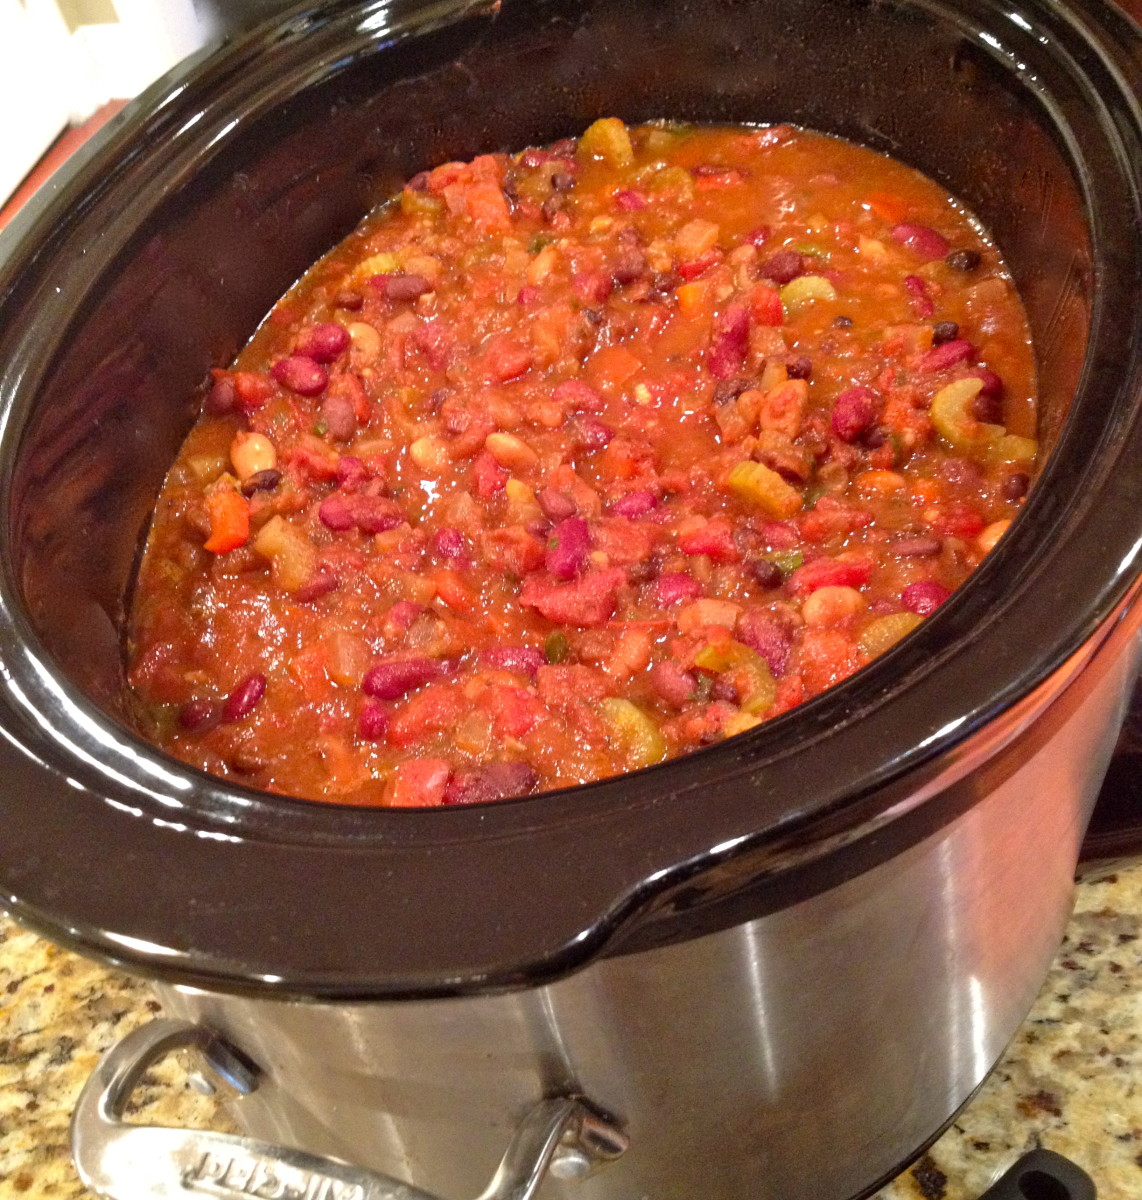 Chili in the slow cooker